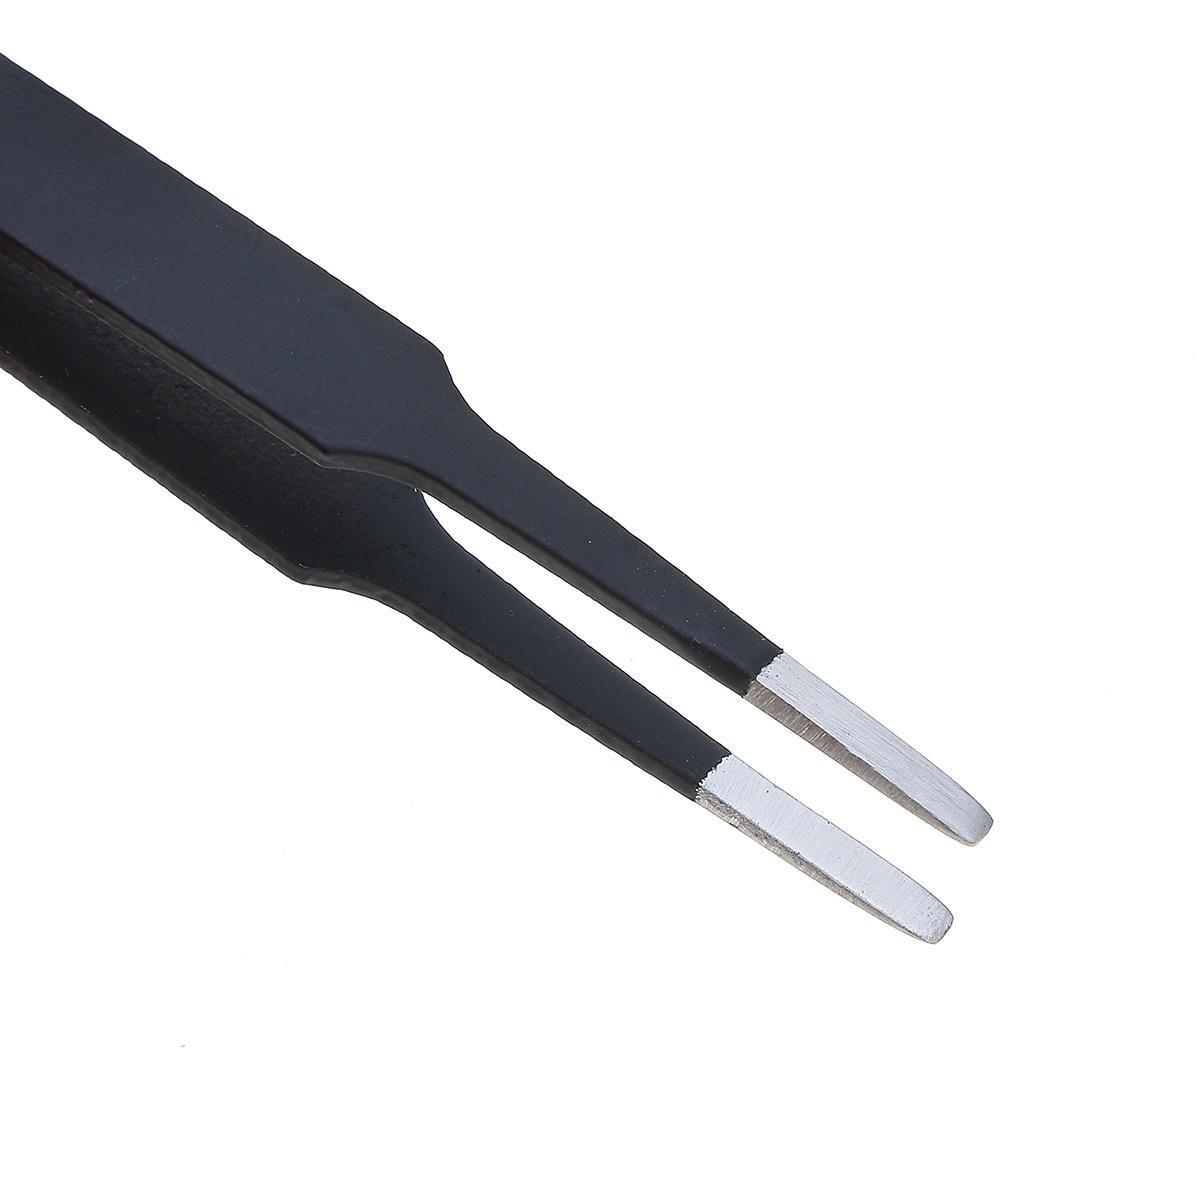 Anti-static Stainless Steel Precision Tweezers for Electronics / 3D Printing - PrinterMods